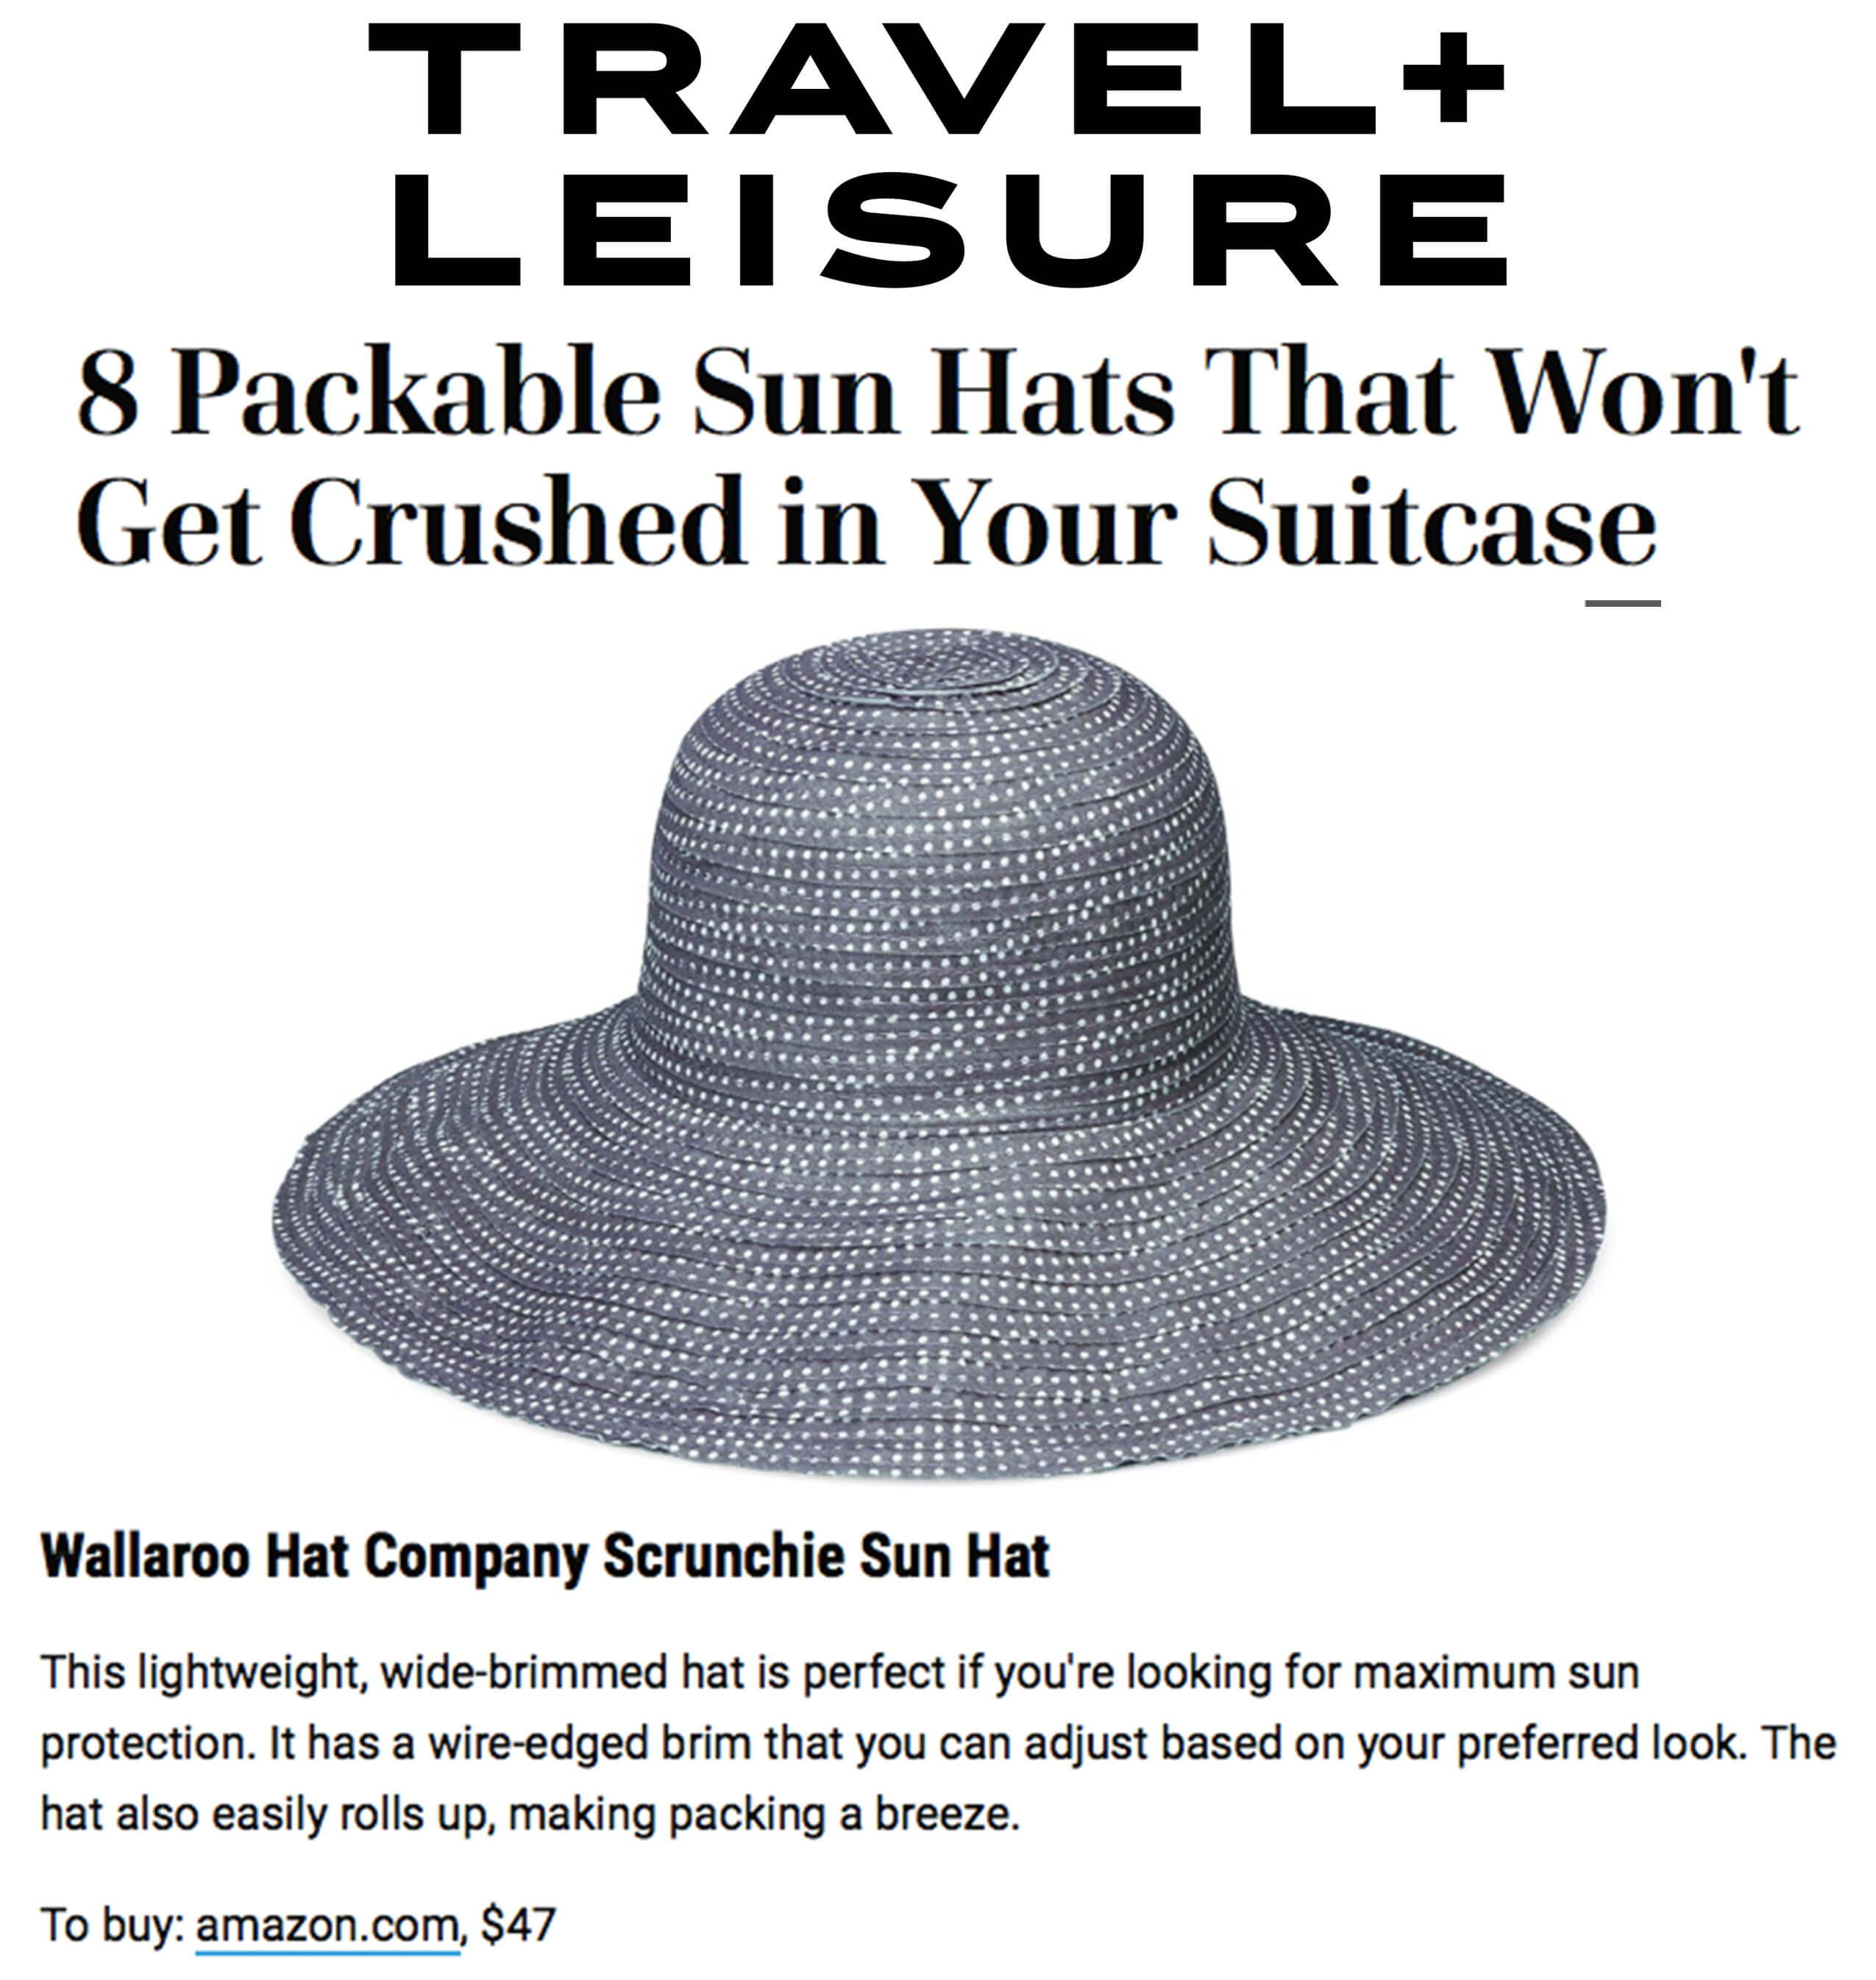 Travel & Leisure's List of Foldable Sun Hats for Ladies